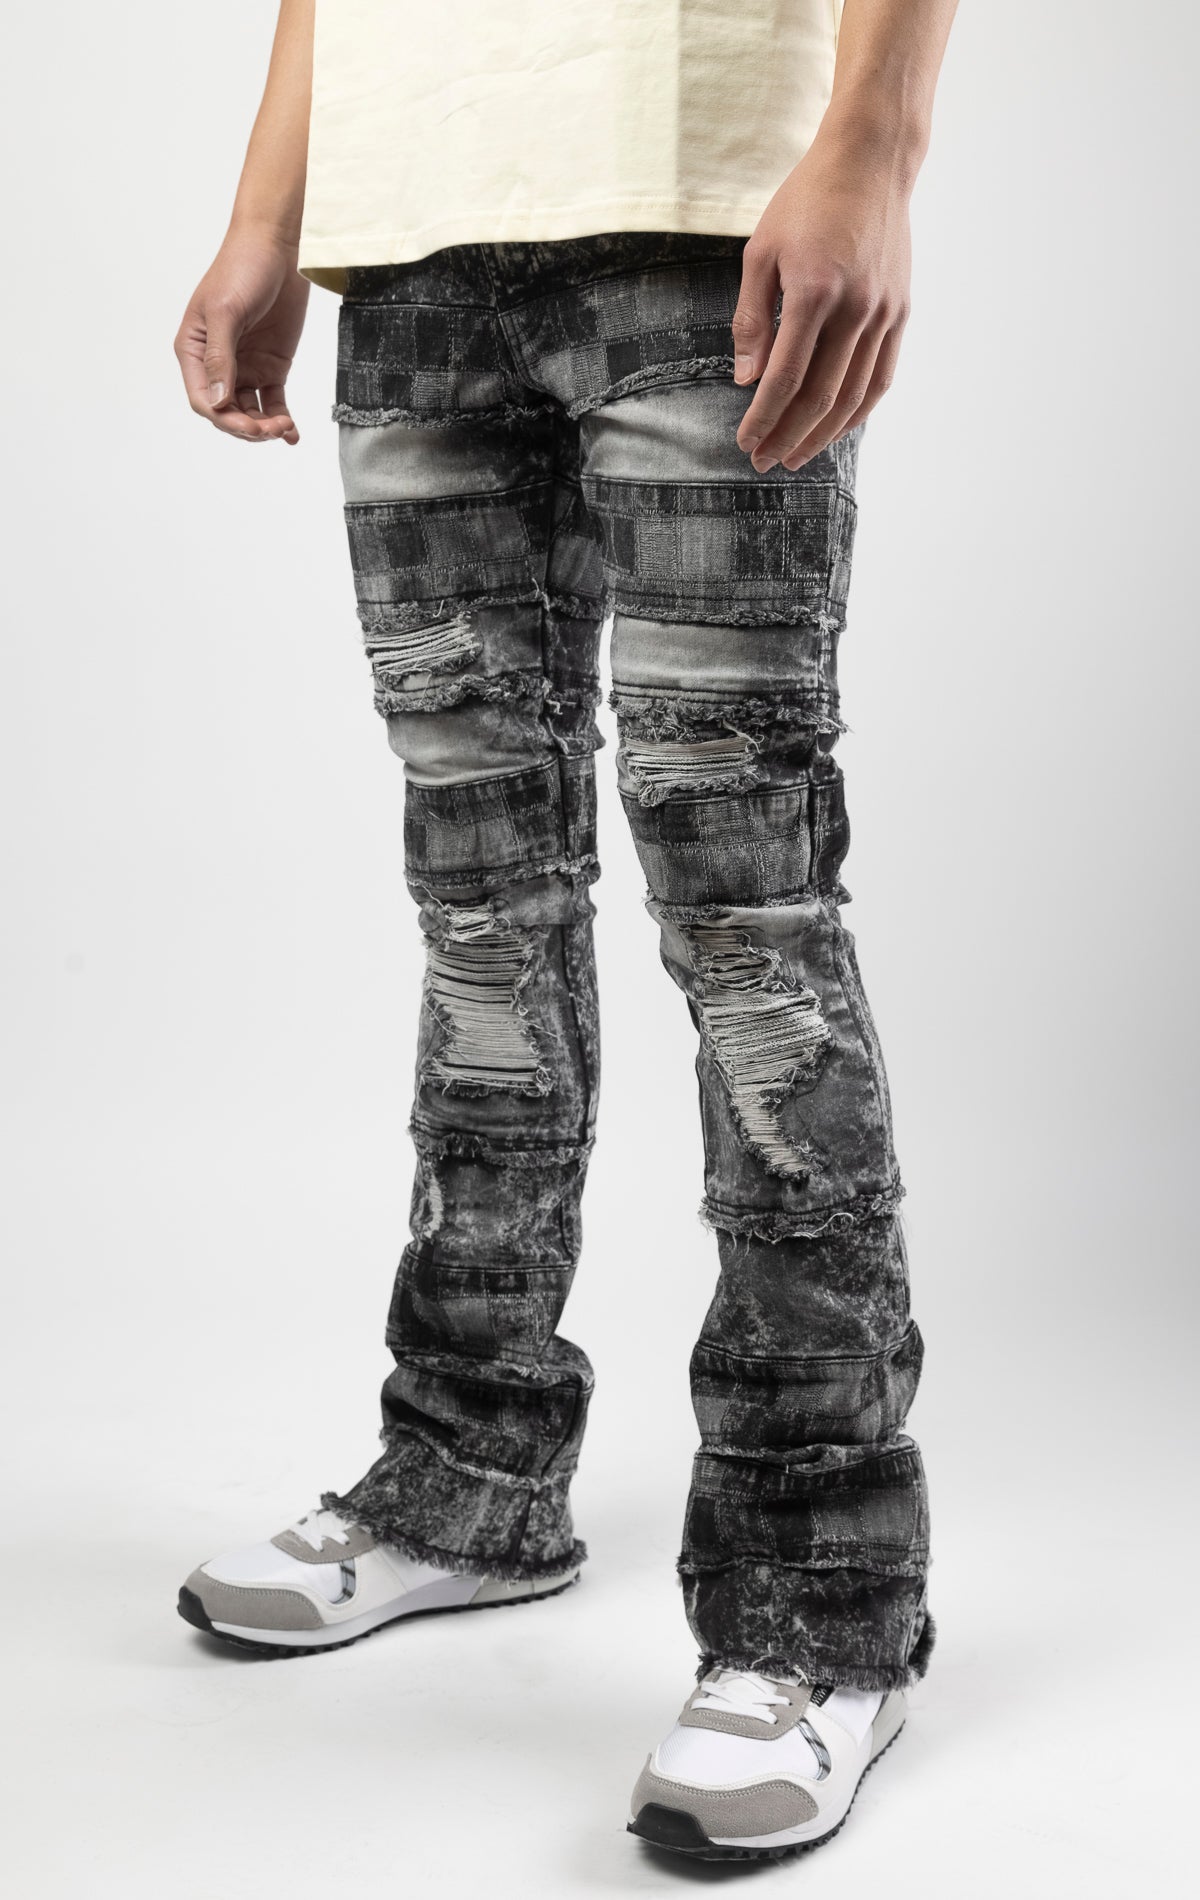 Black wash iconic stacked jeans crafted from high-quality, durable denim fabric consisting of 98% cotton and 2% spandex with a semi flare silhouette and a length of 35"-37". Featuring a distinctive ripped and repair design with pocket patches and a multi-tone dye throughout, these urban-inspired pants are true to size